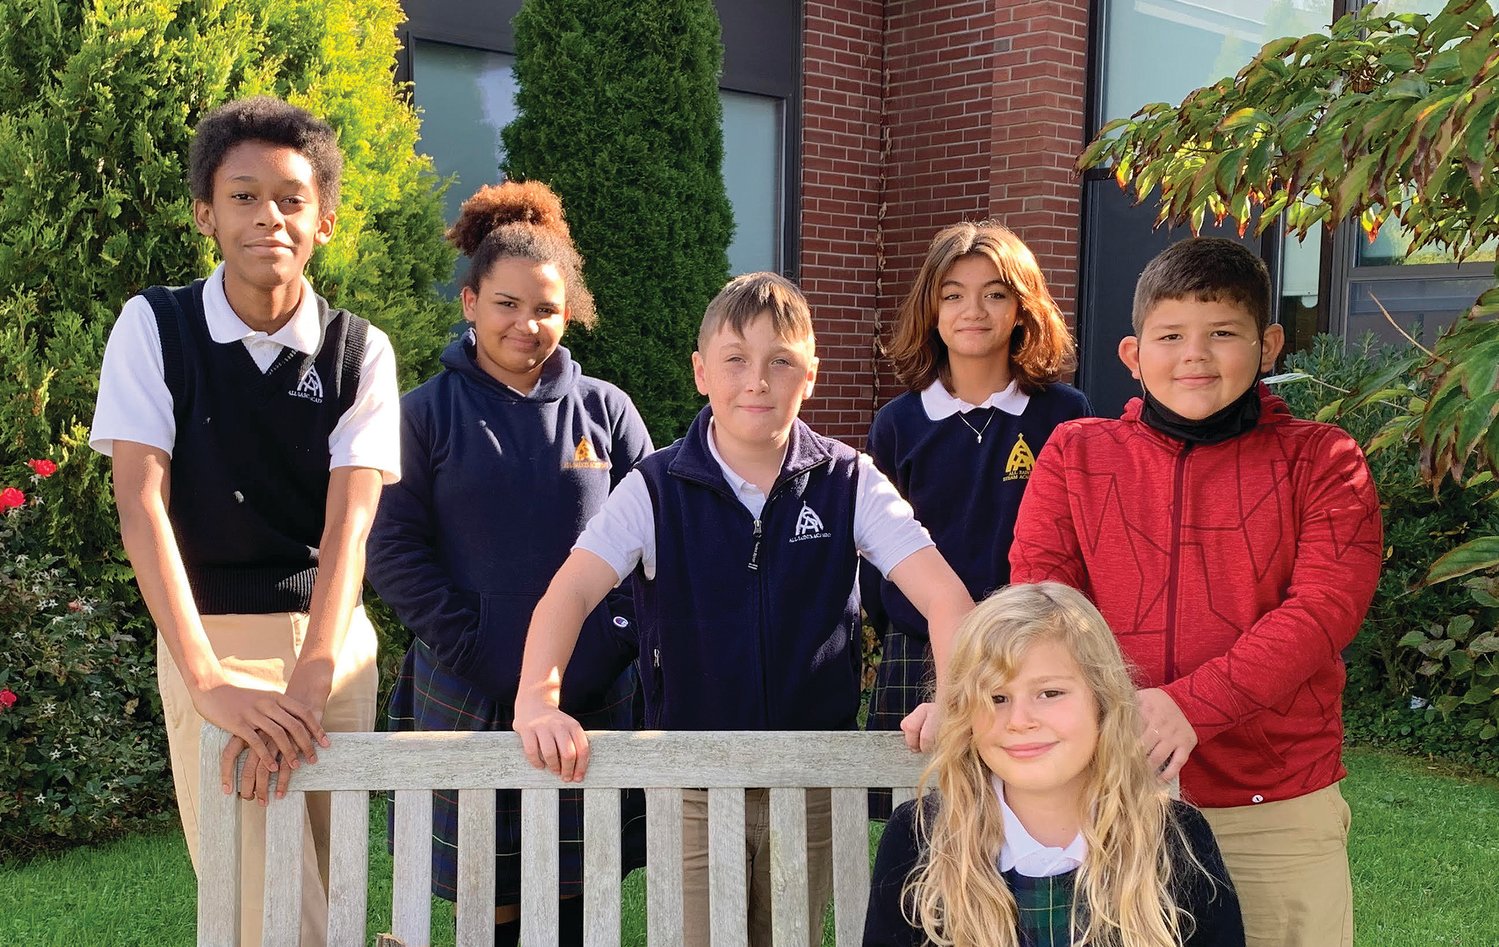 Families in the Star Kids program are able to choose the educational environment that best suits their child, including 18 Catholic schools throughout the Dioceses of Providence and Fall River.  This sampling of young scholars from All Saints Academy in Middletown includes two sets of siblings — showing the effect that Star Kid support can have on an entire family.